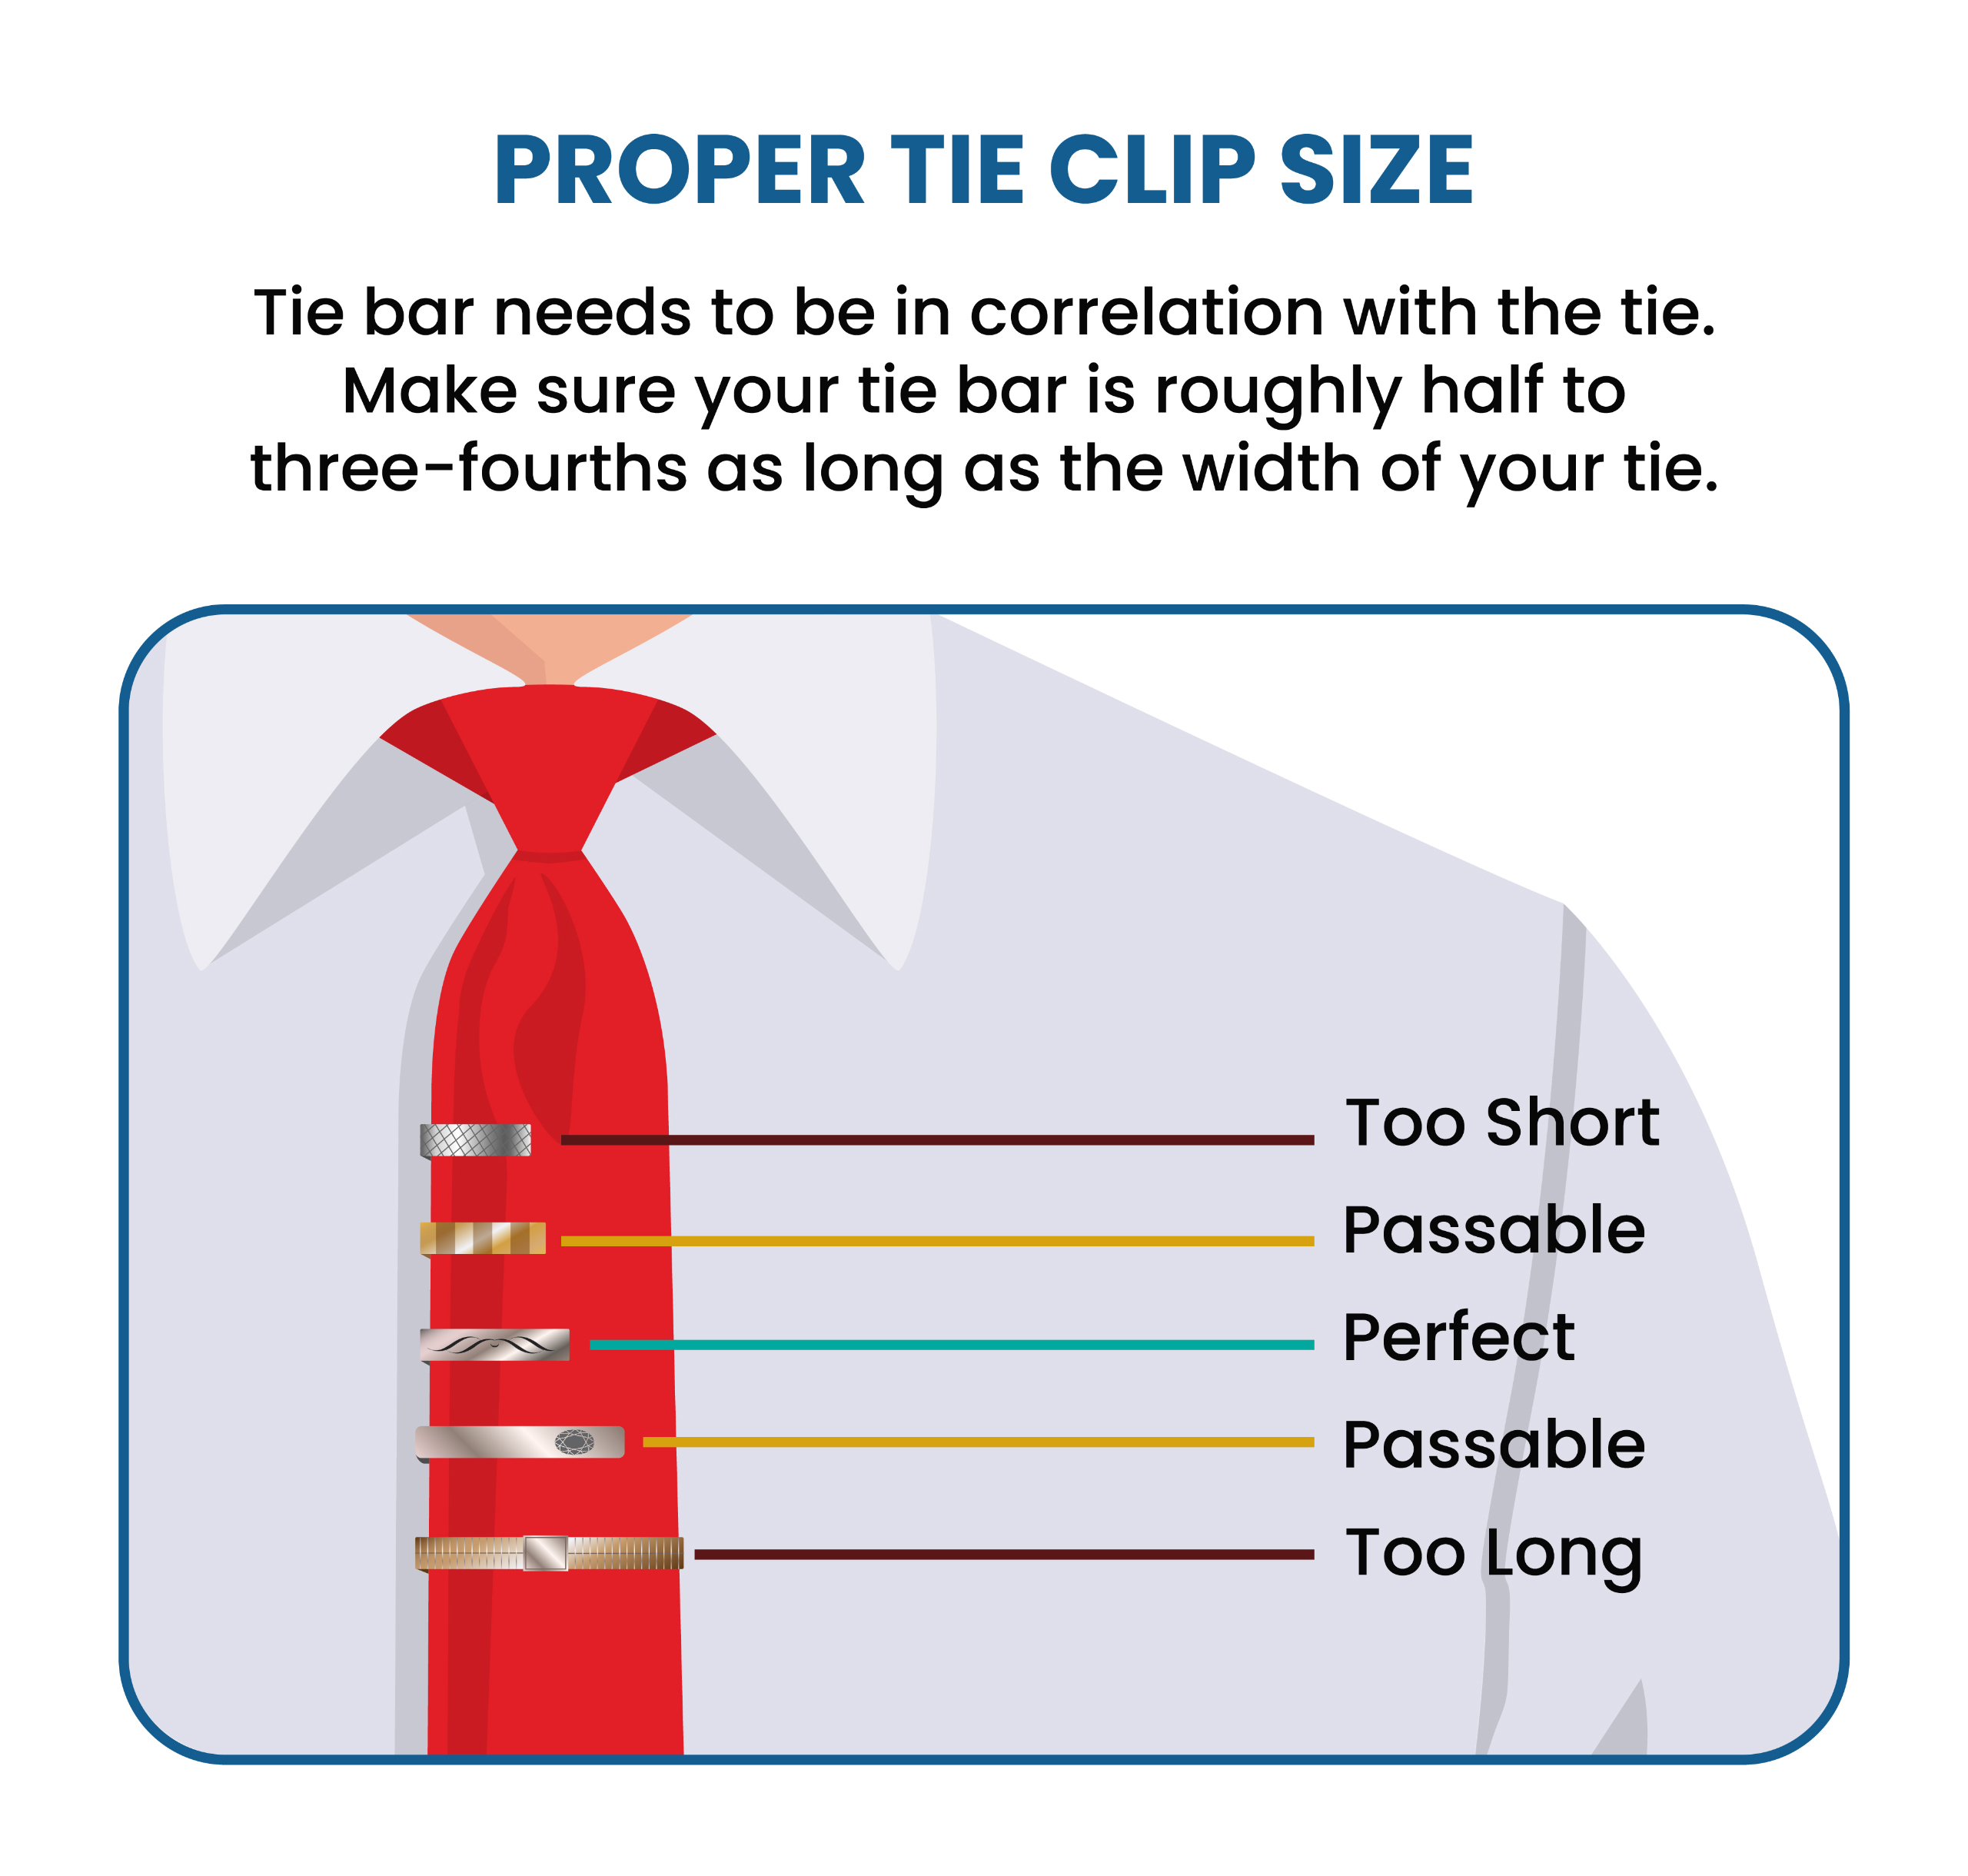 Ties 101: A Man's Guide to Neckties